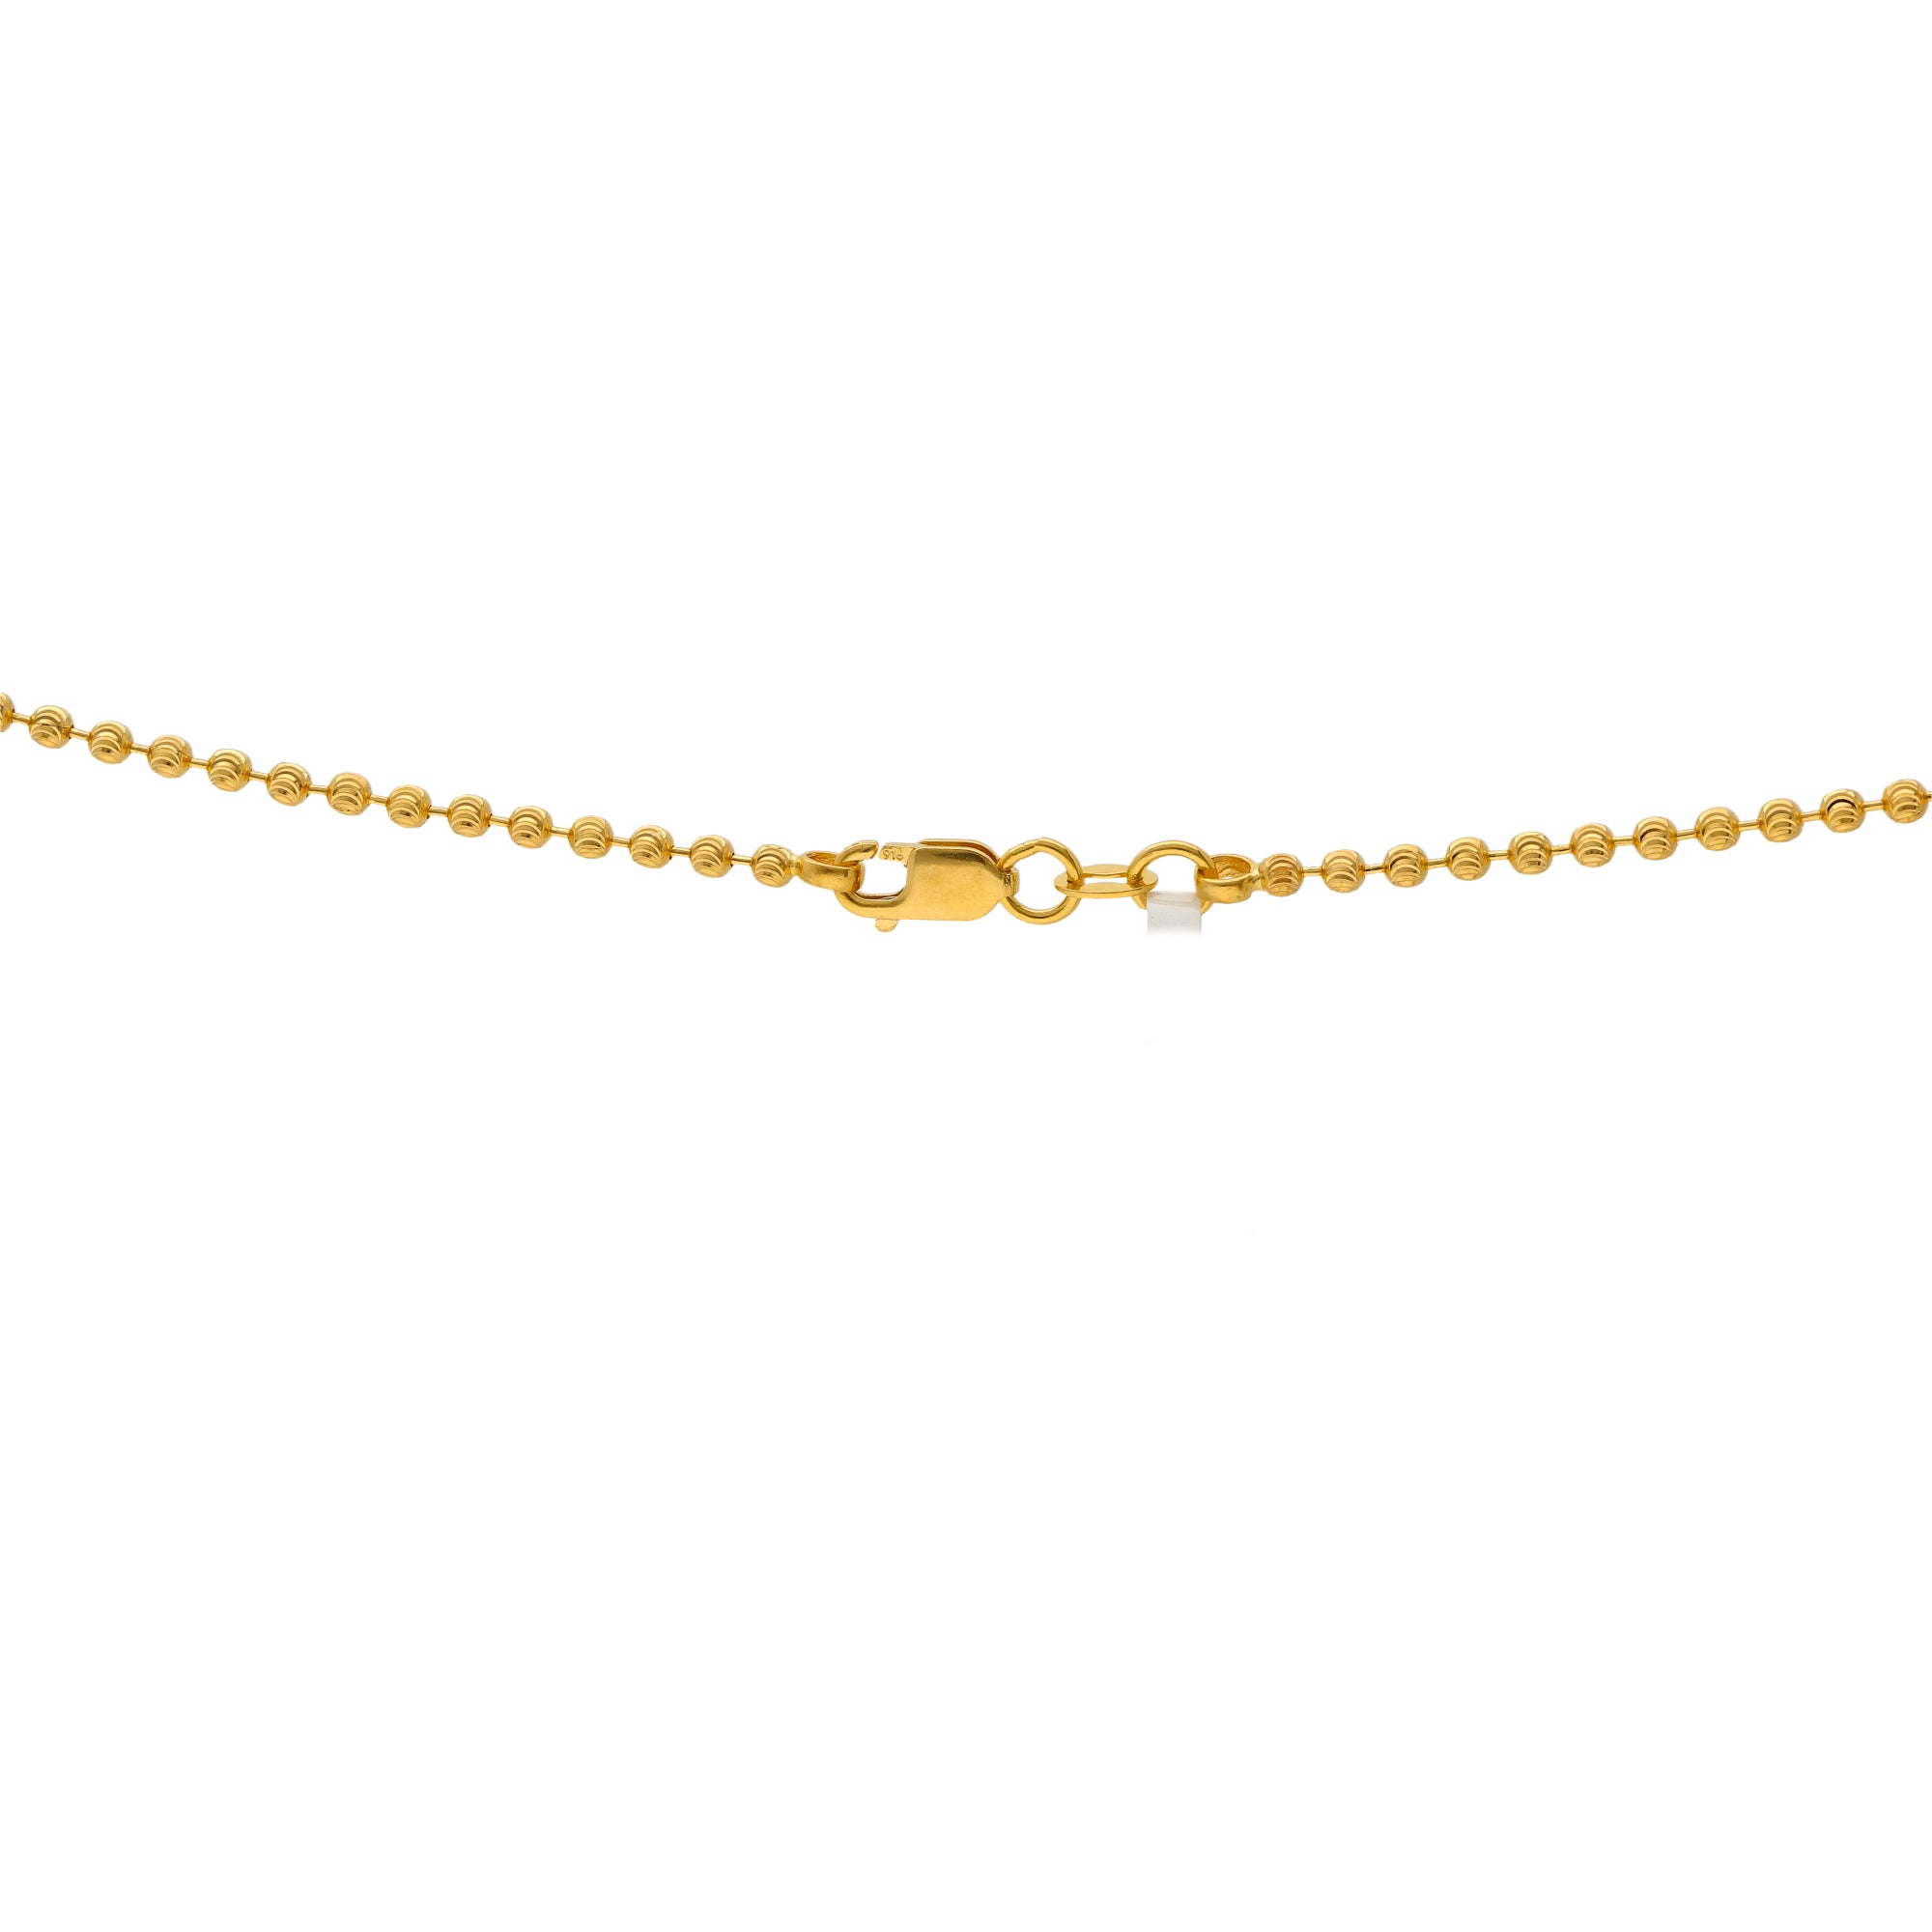 22K Yellow Gold 16in Beaded Chain (6 gms)